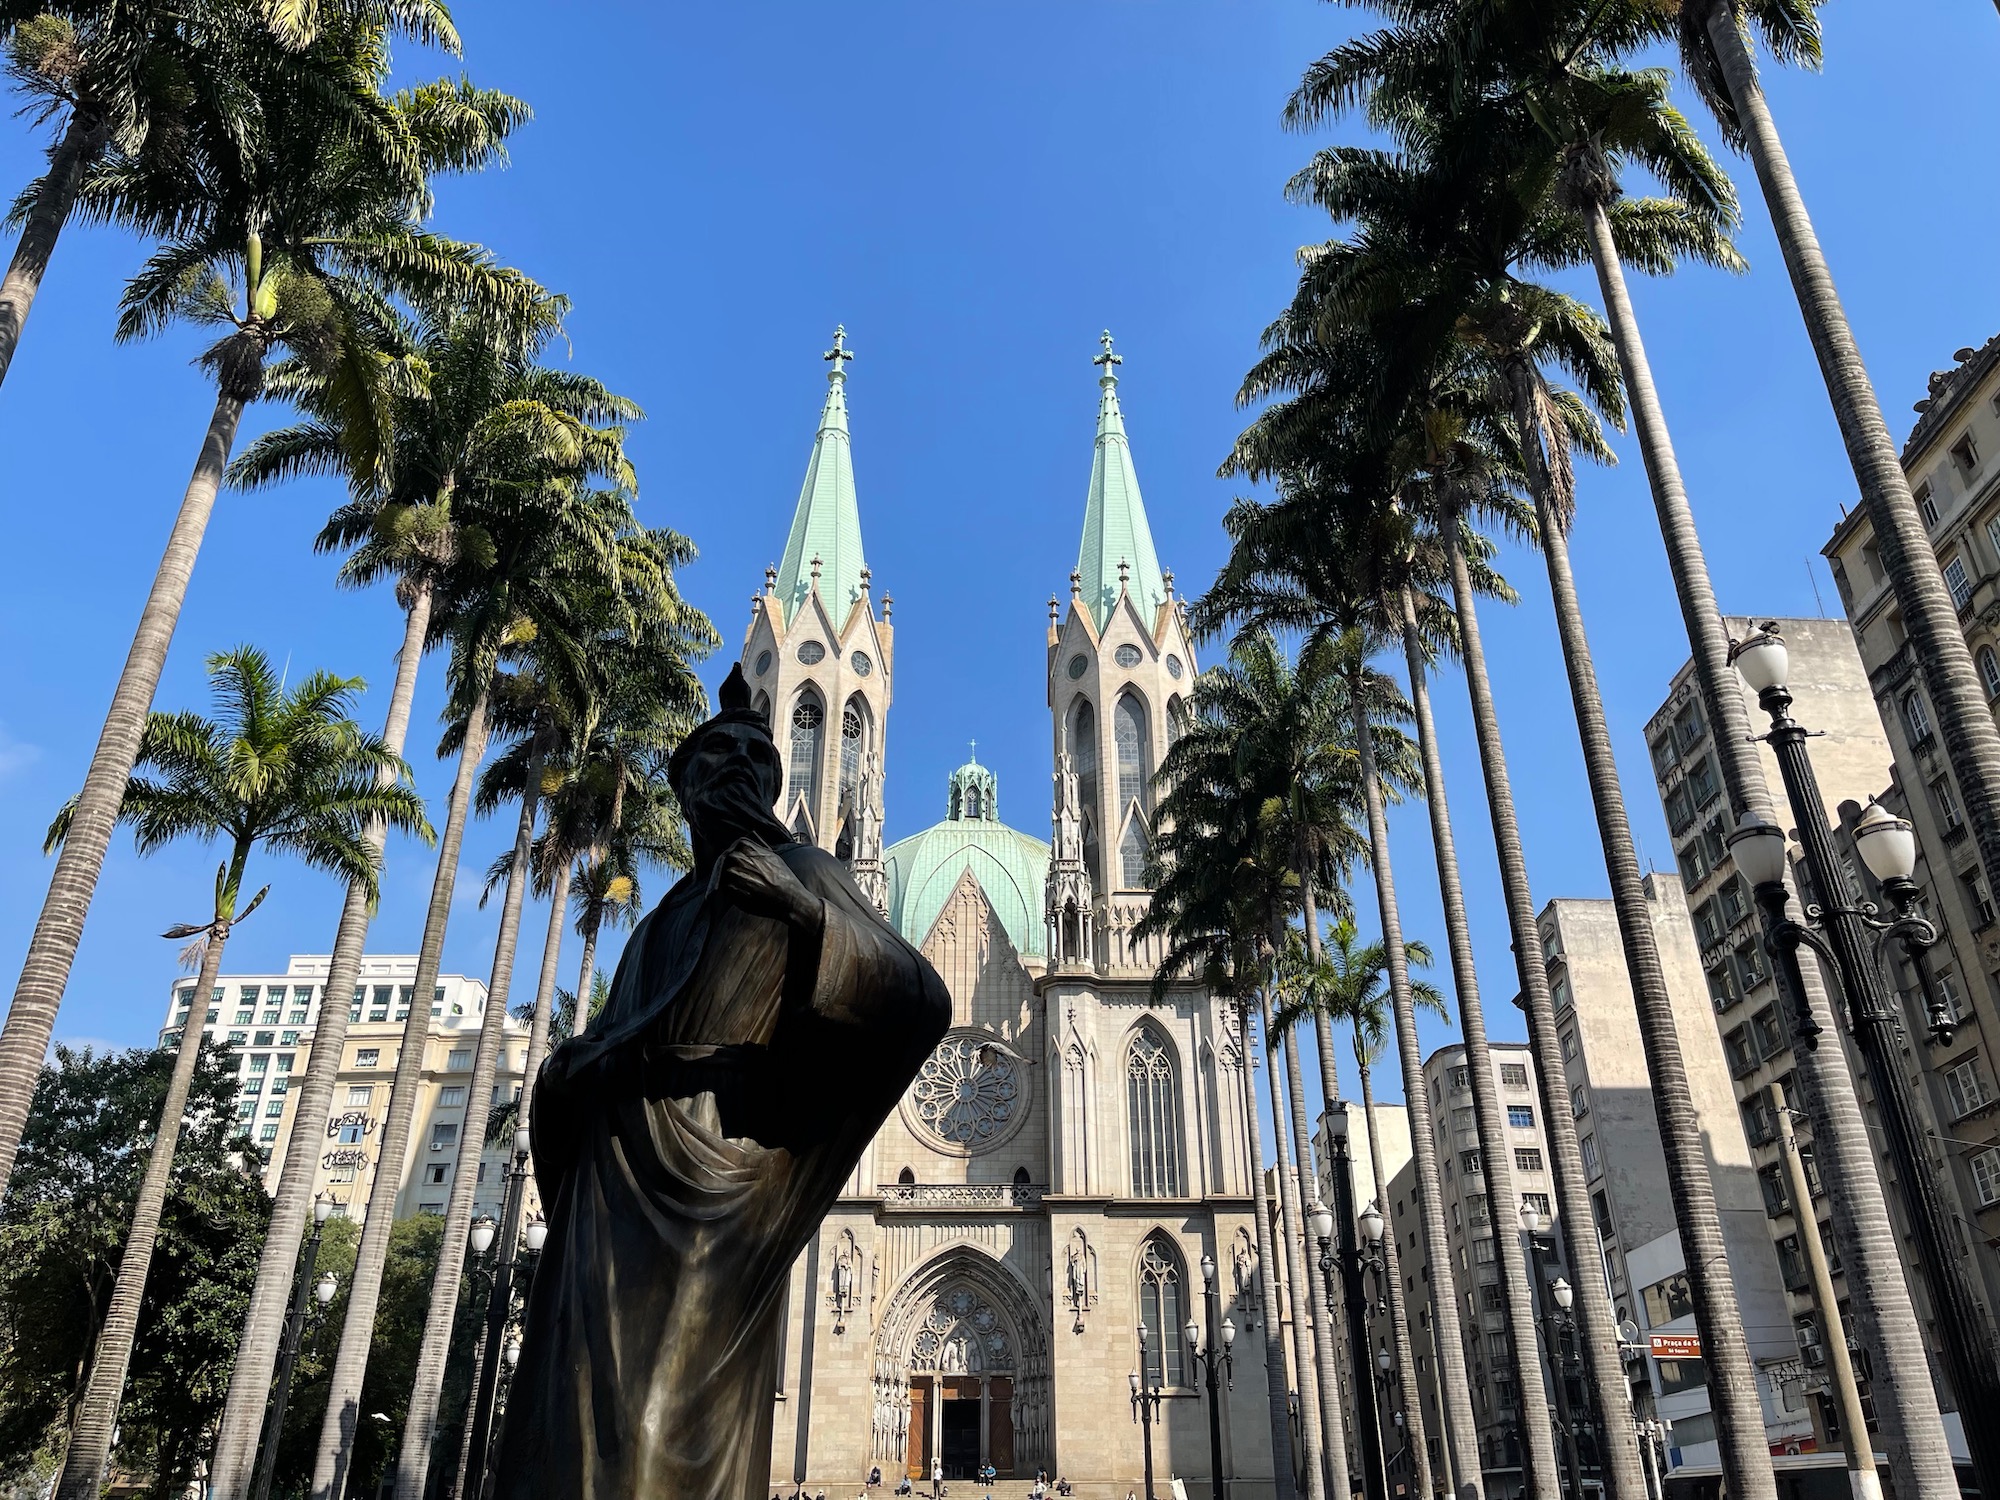 a statue in front of São Paulo Cathedral with palm trees